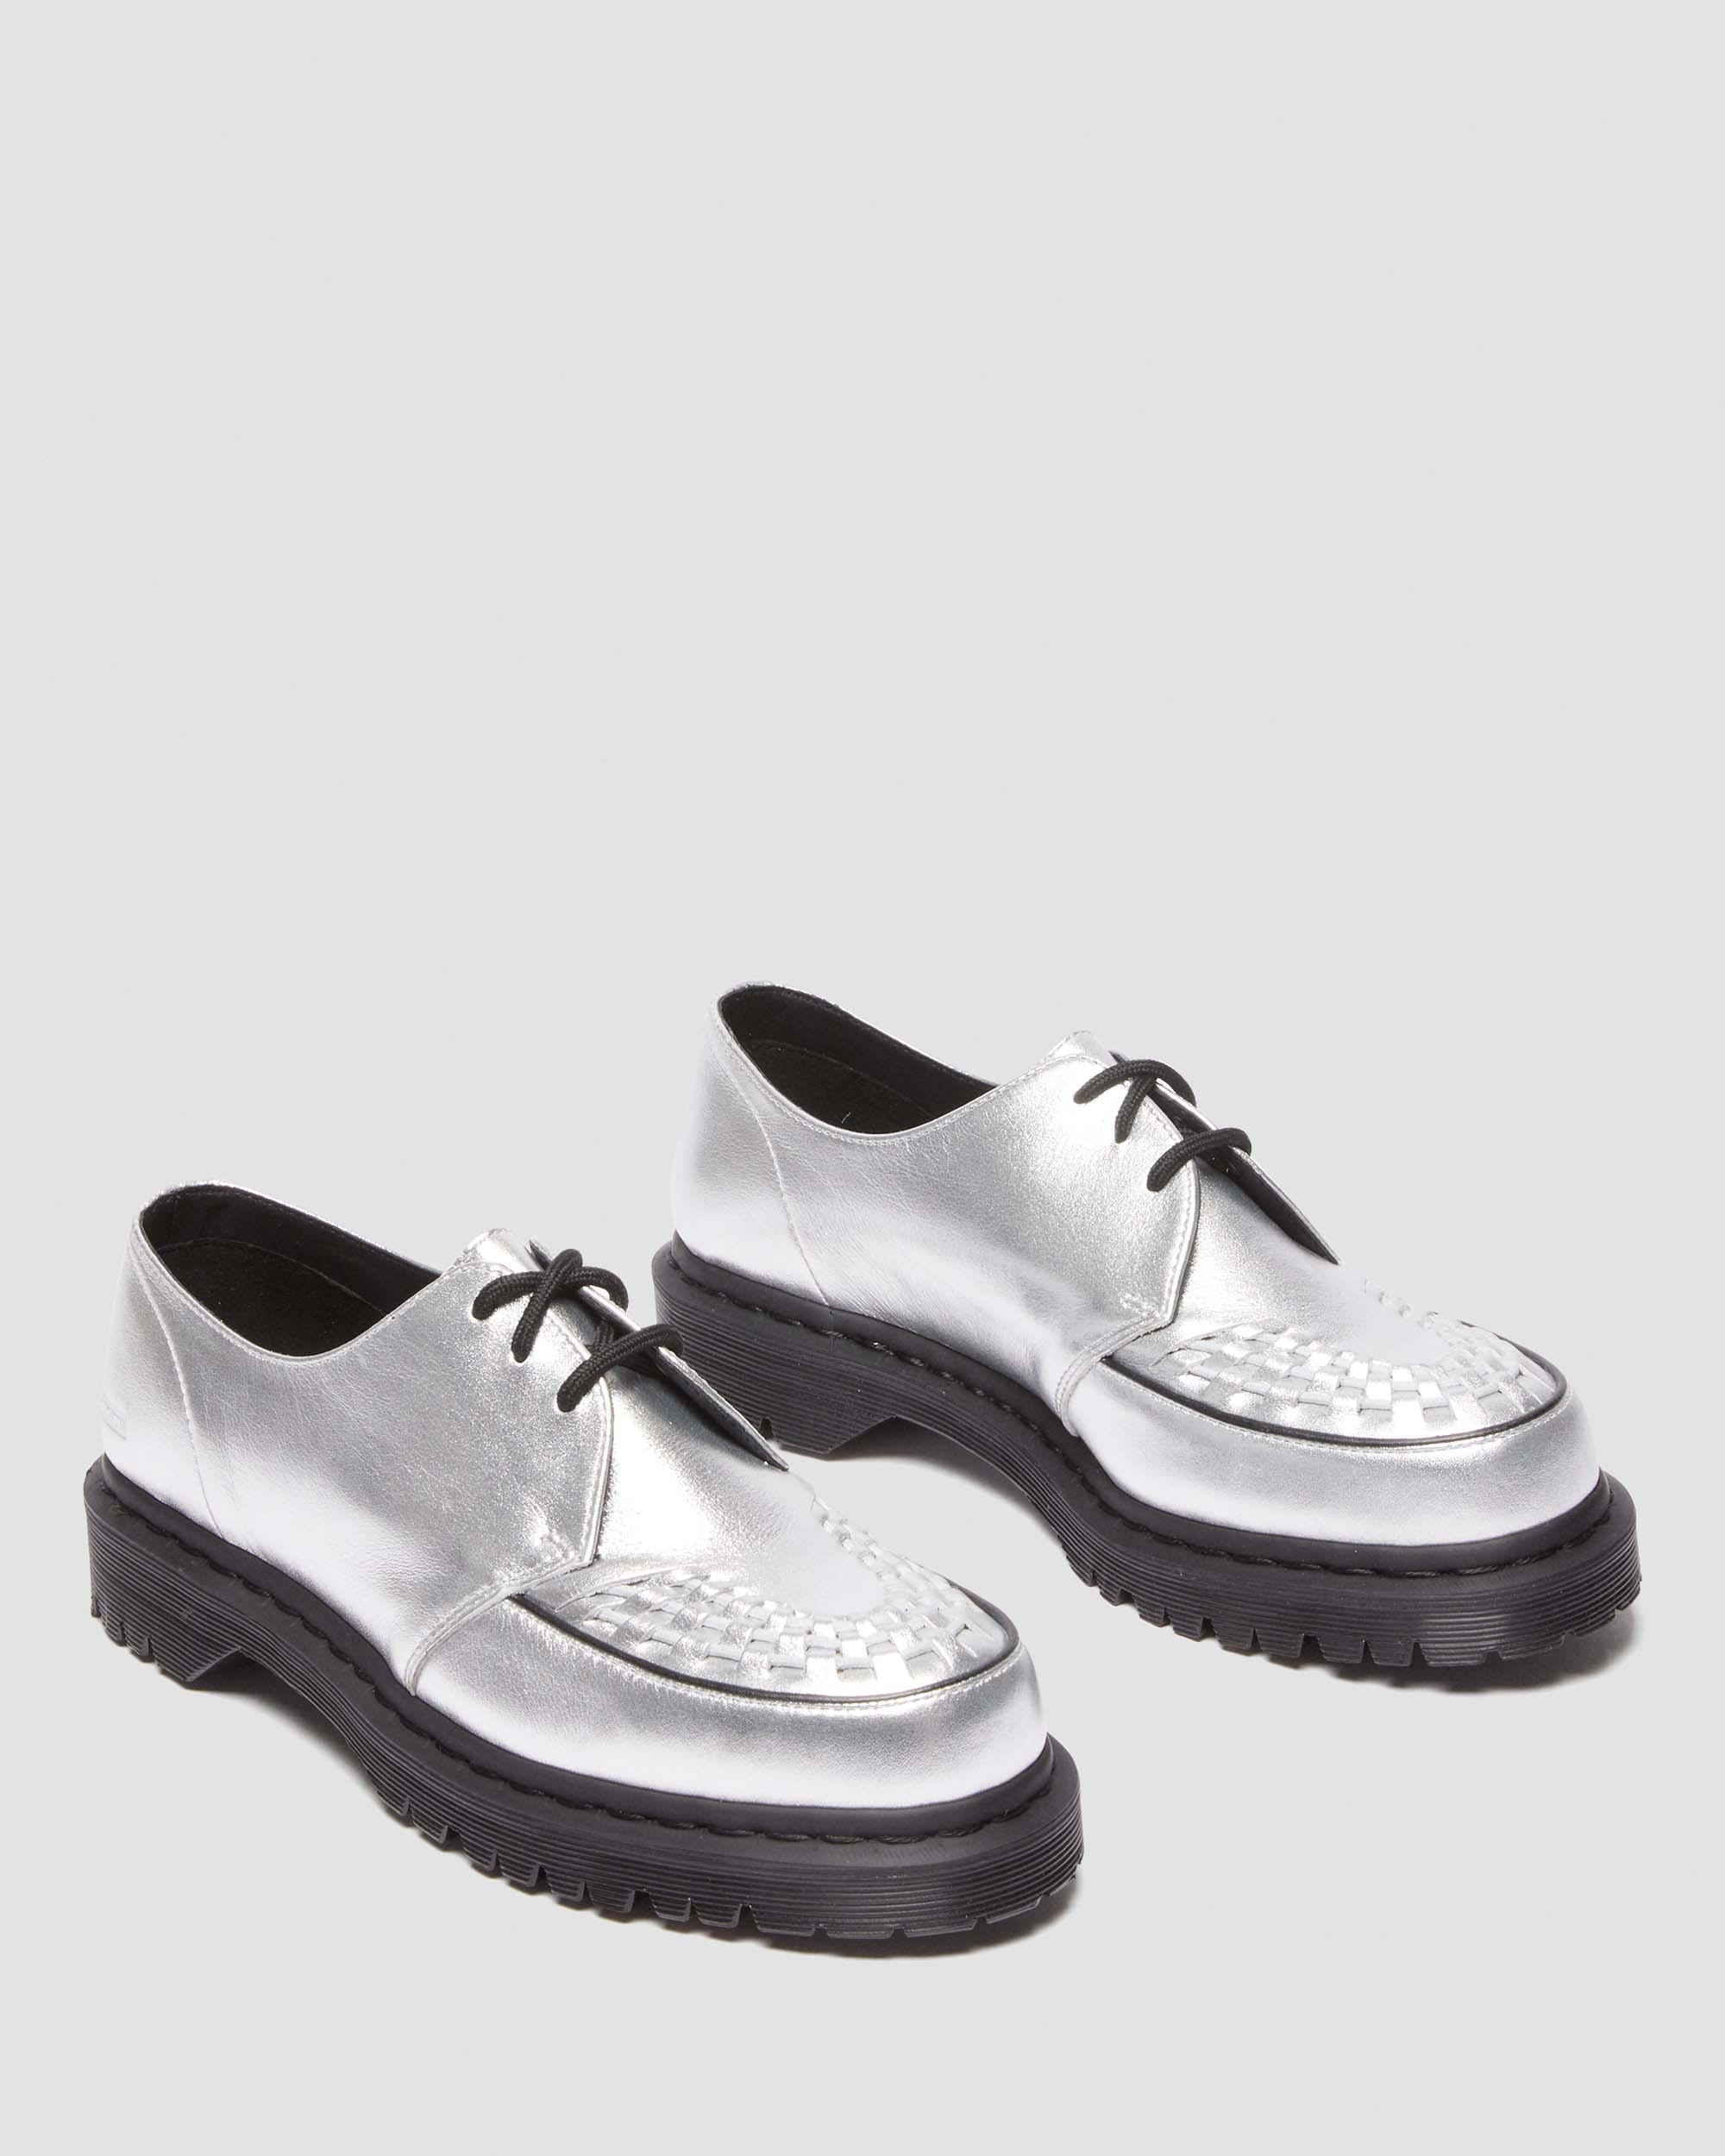 Ramsey Supreme Nappa Leather Creepers in Silver | Dr. Martens